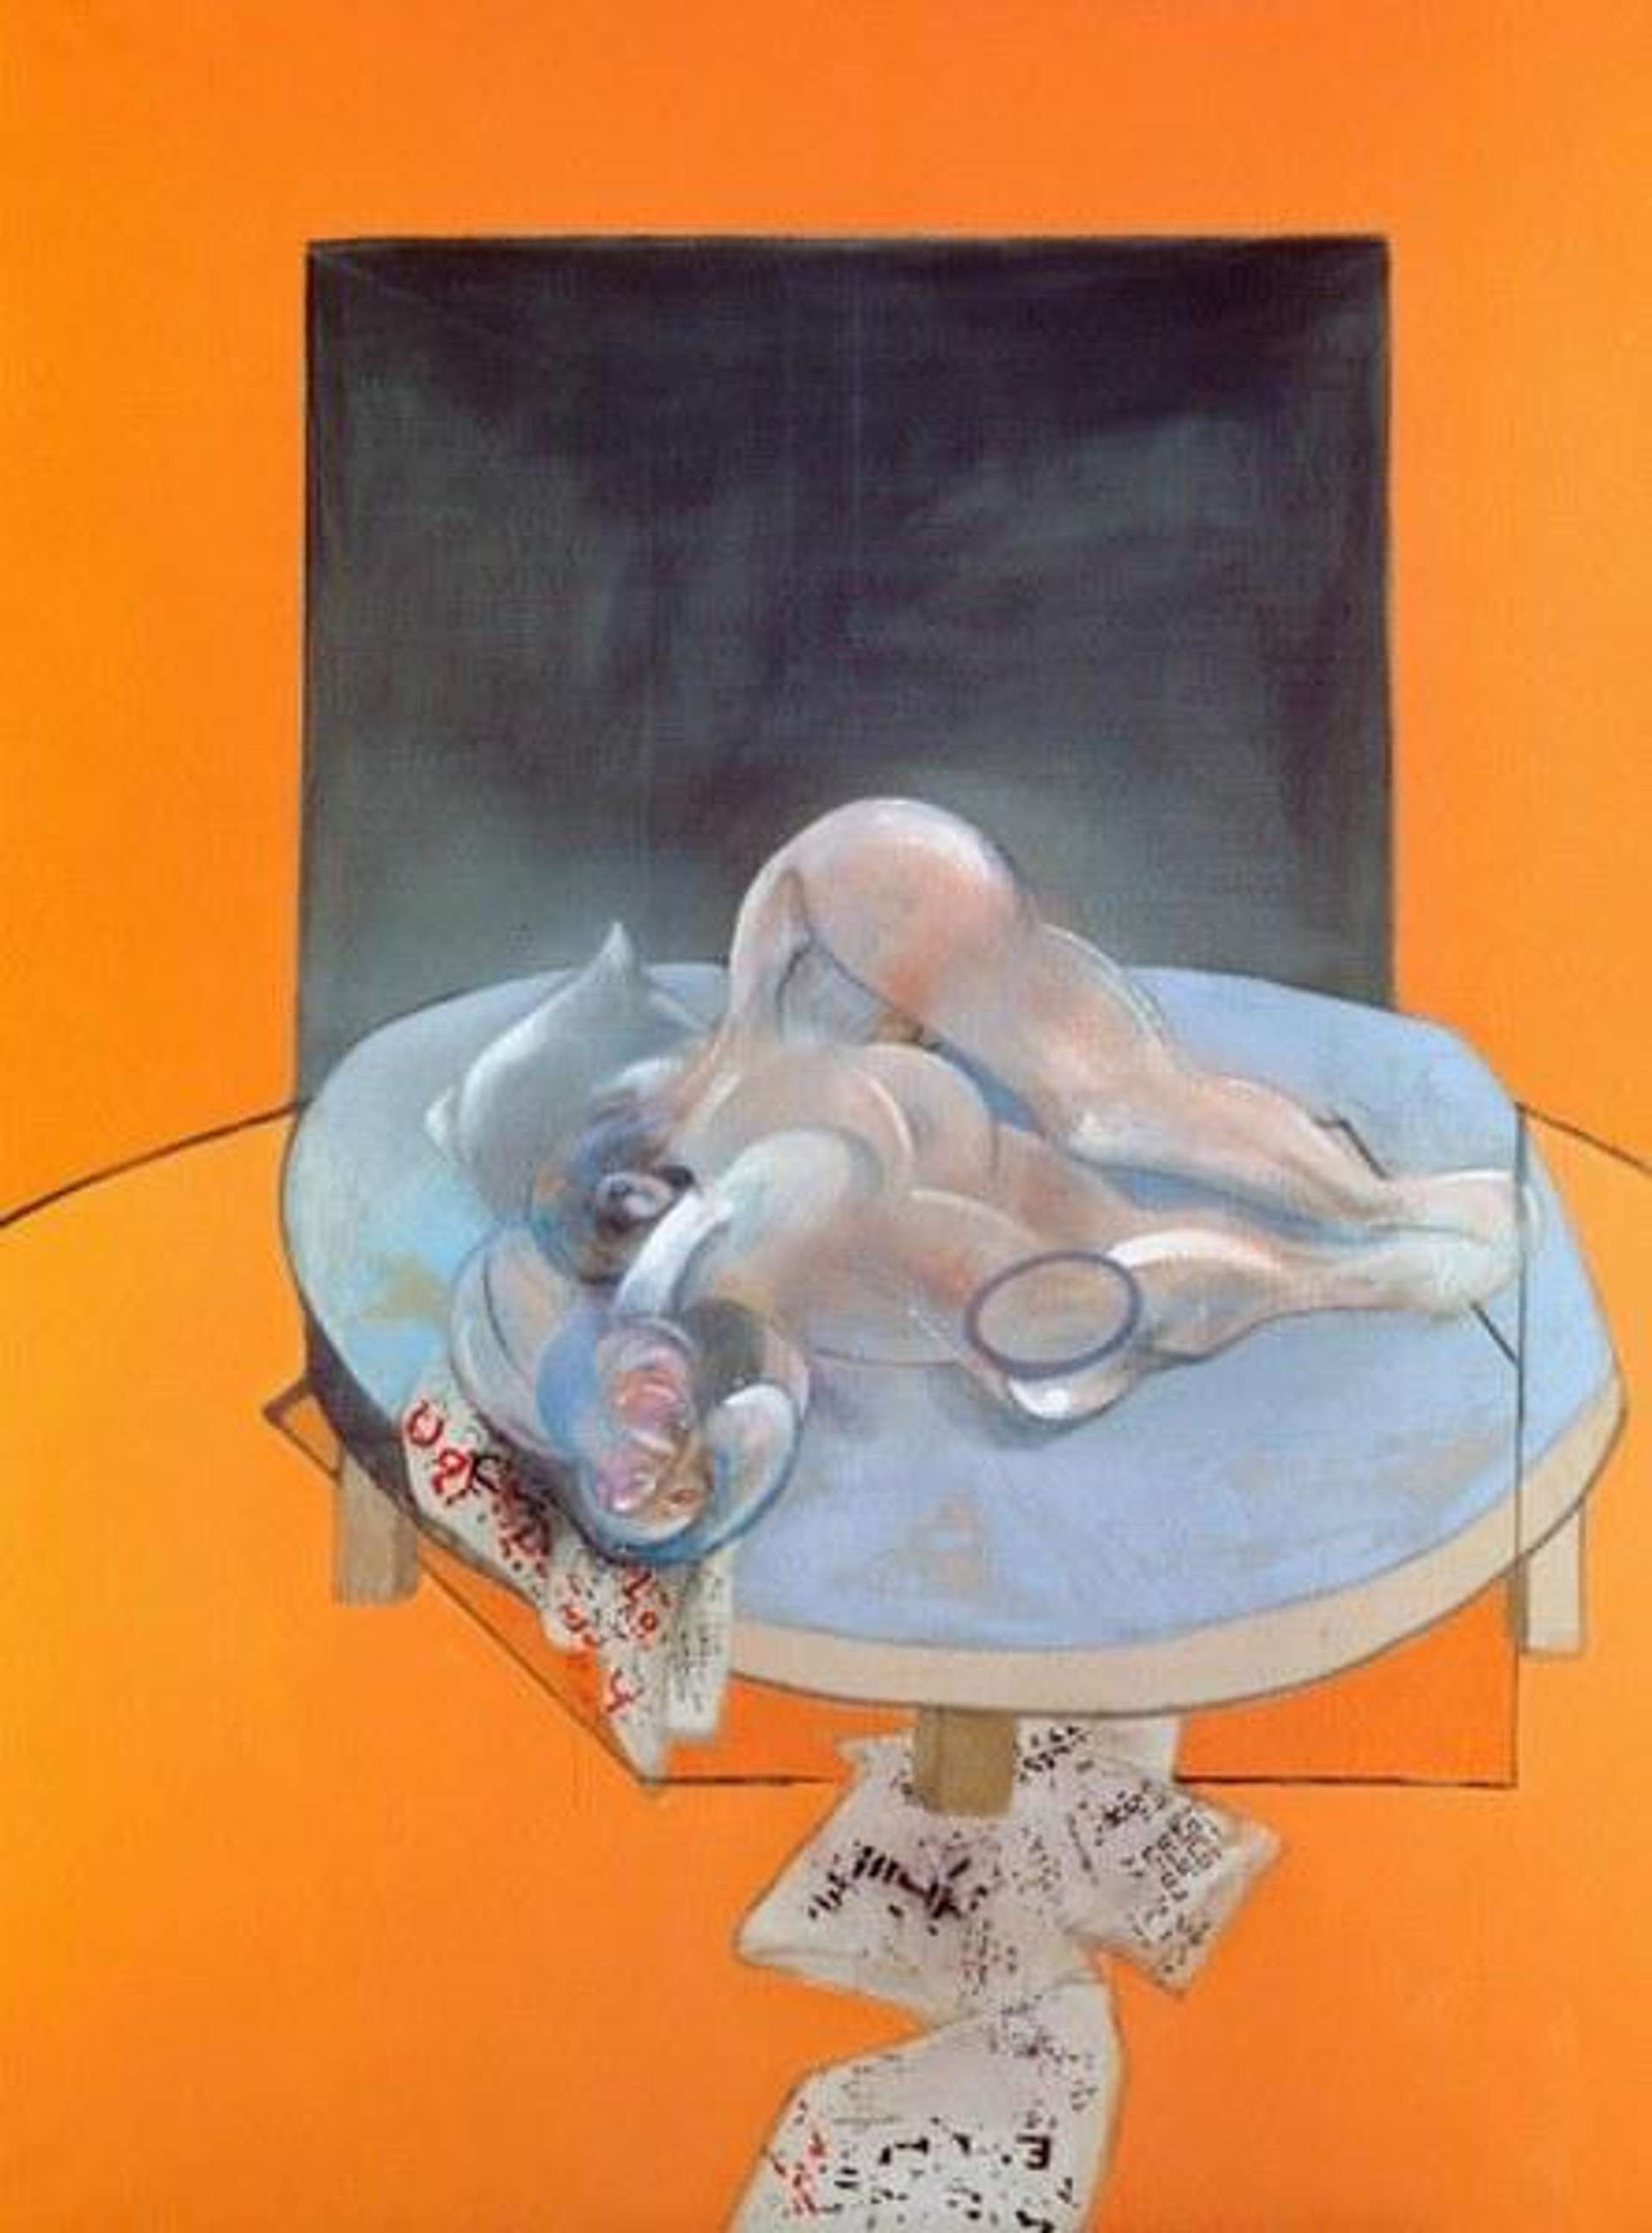 Francis Bacon's Three Studies Of The Human Body (central panel). An abstract painting of a morphed, nude body in a round bed. 